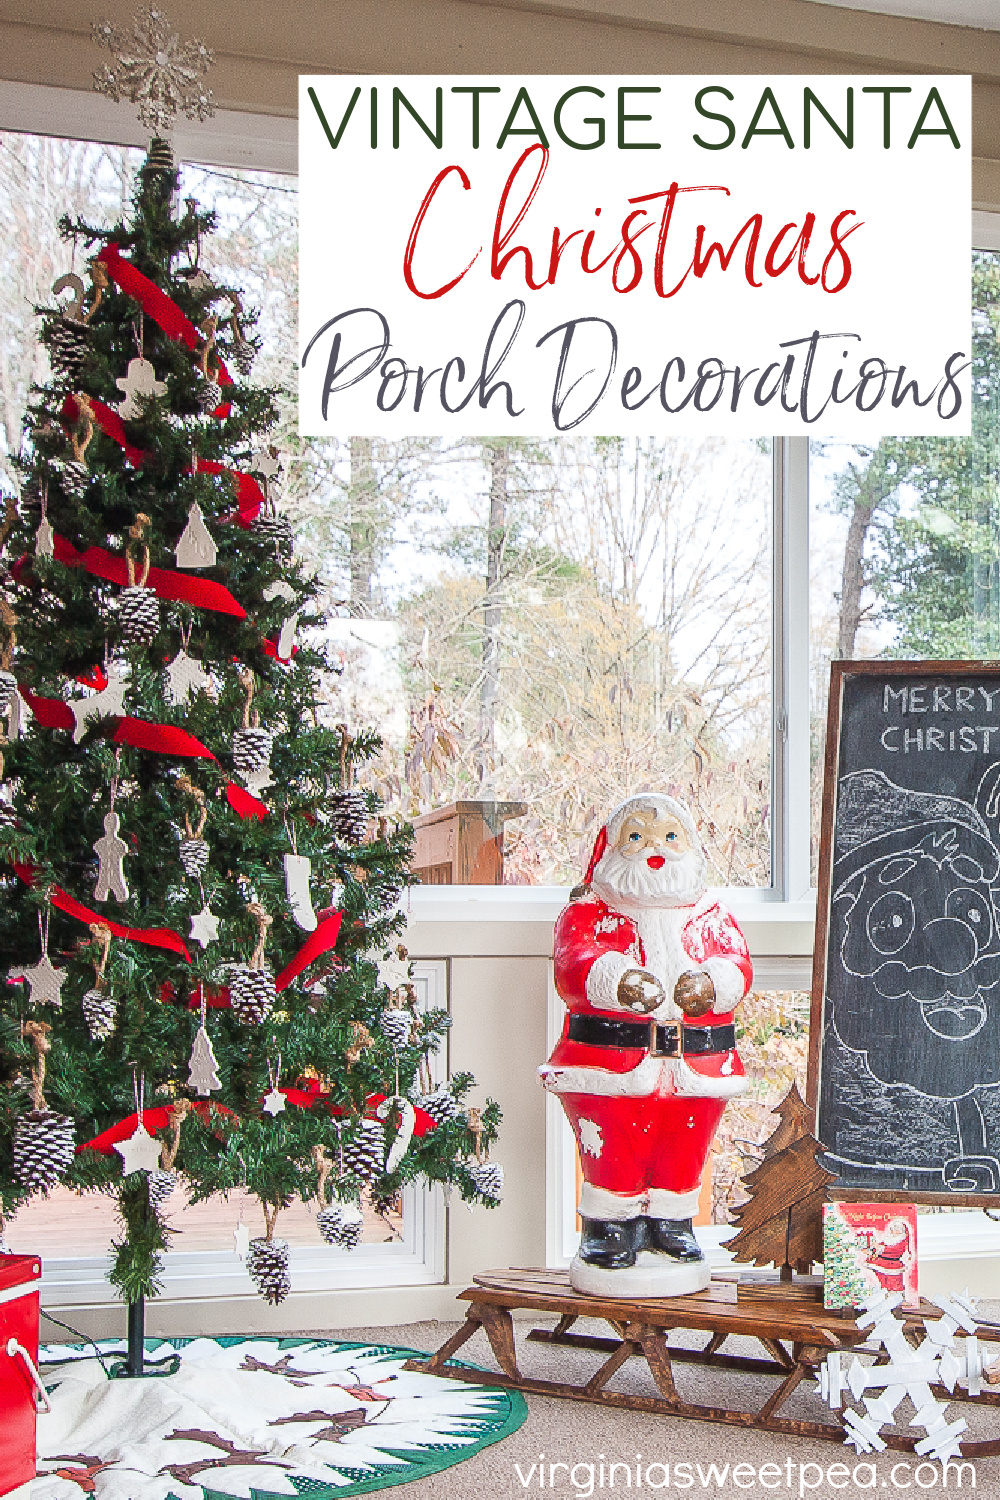 A porch decorated for Christmas with a tree with handmade ornaments, handmade tree skirt, blowmold Santa, and more vintage Christmas decor